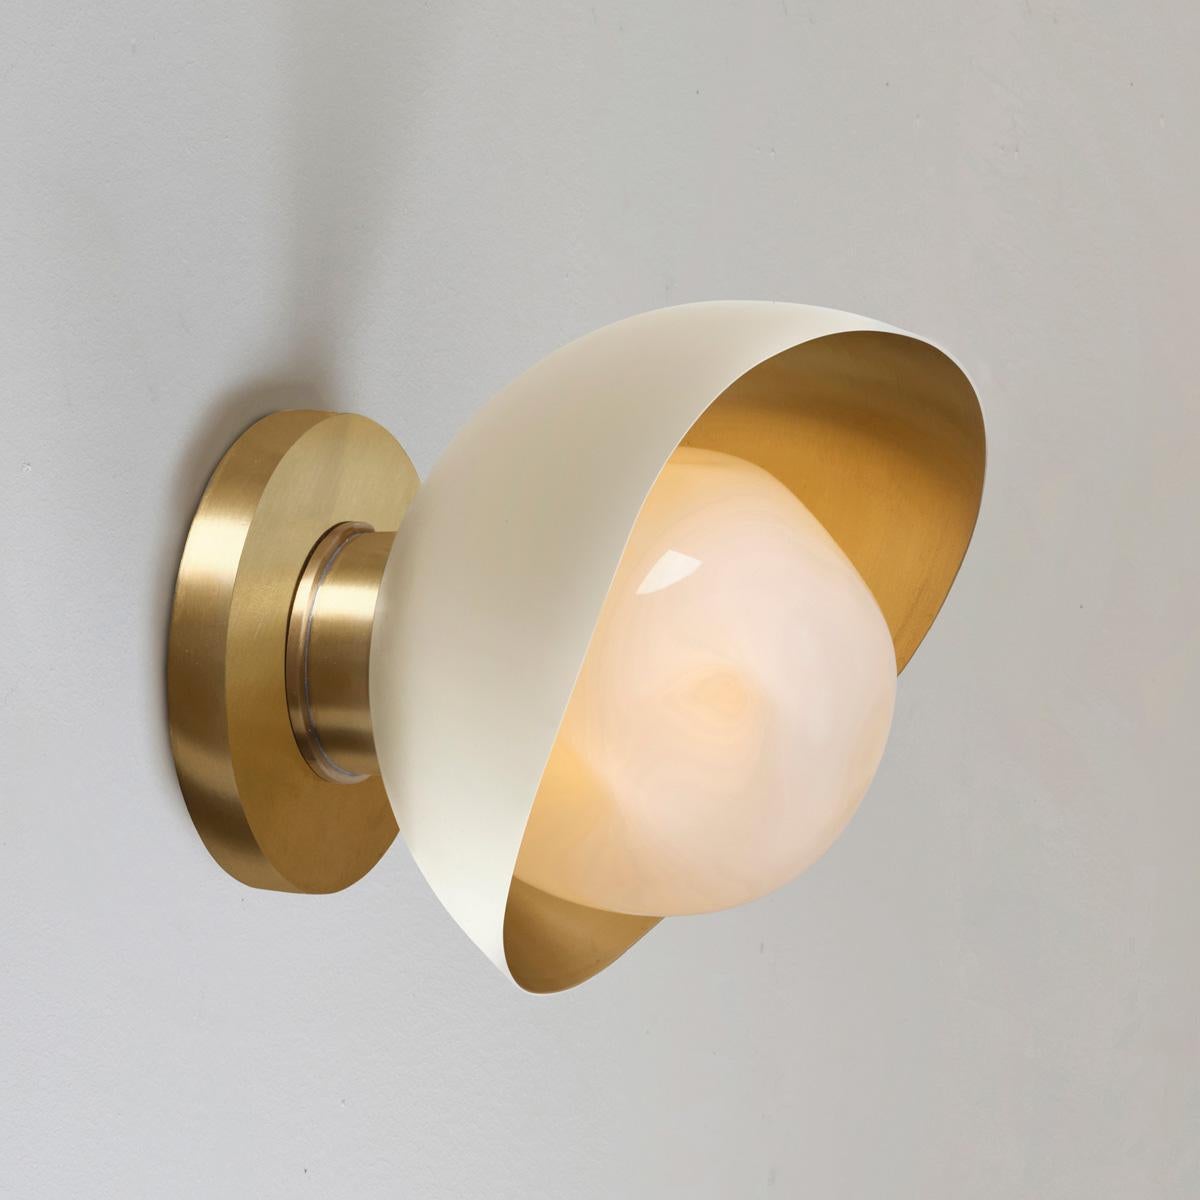 Perla Mini Wall Light by Gaspare Asaro. Nickel Finish In New Condition For Sale In New York, NY